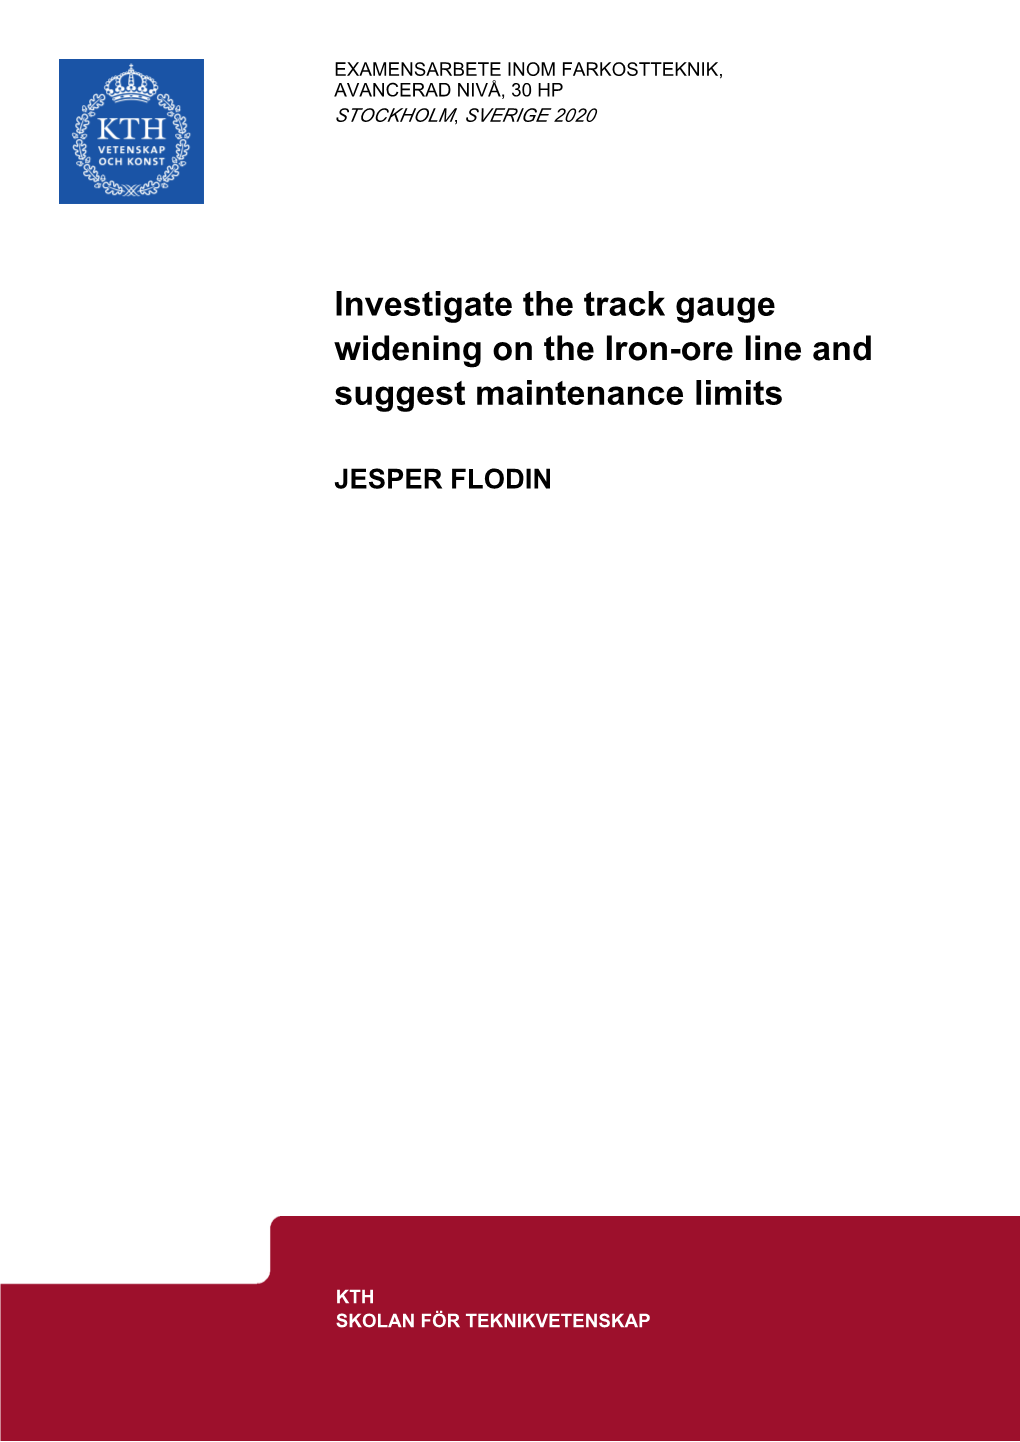 Investigate the Track Gauge Widening on the Iron-Ore Line and Suggest Maintenance Limits